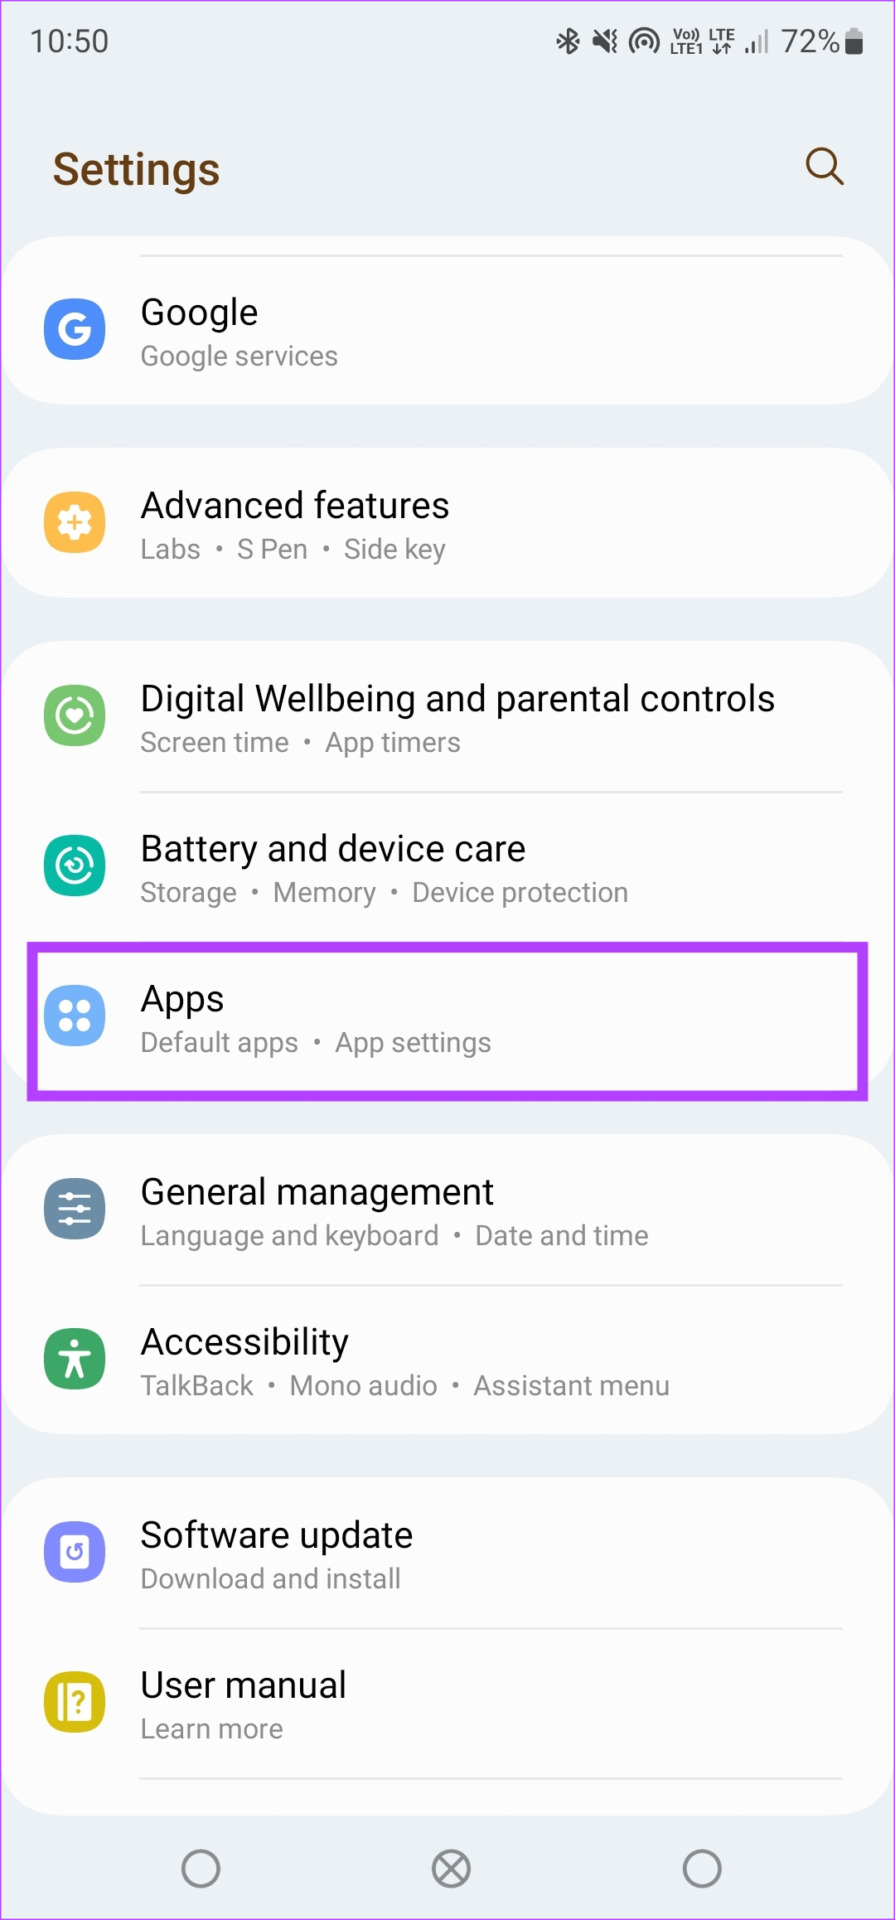 How to update Play Store and Galaxy Store apps on your Galaxy phone